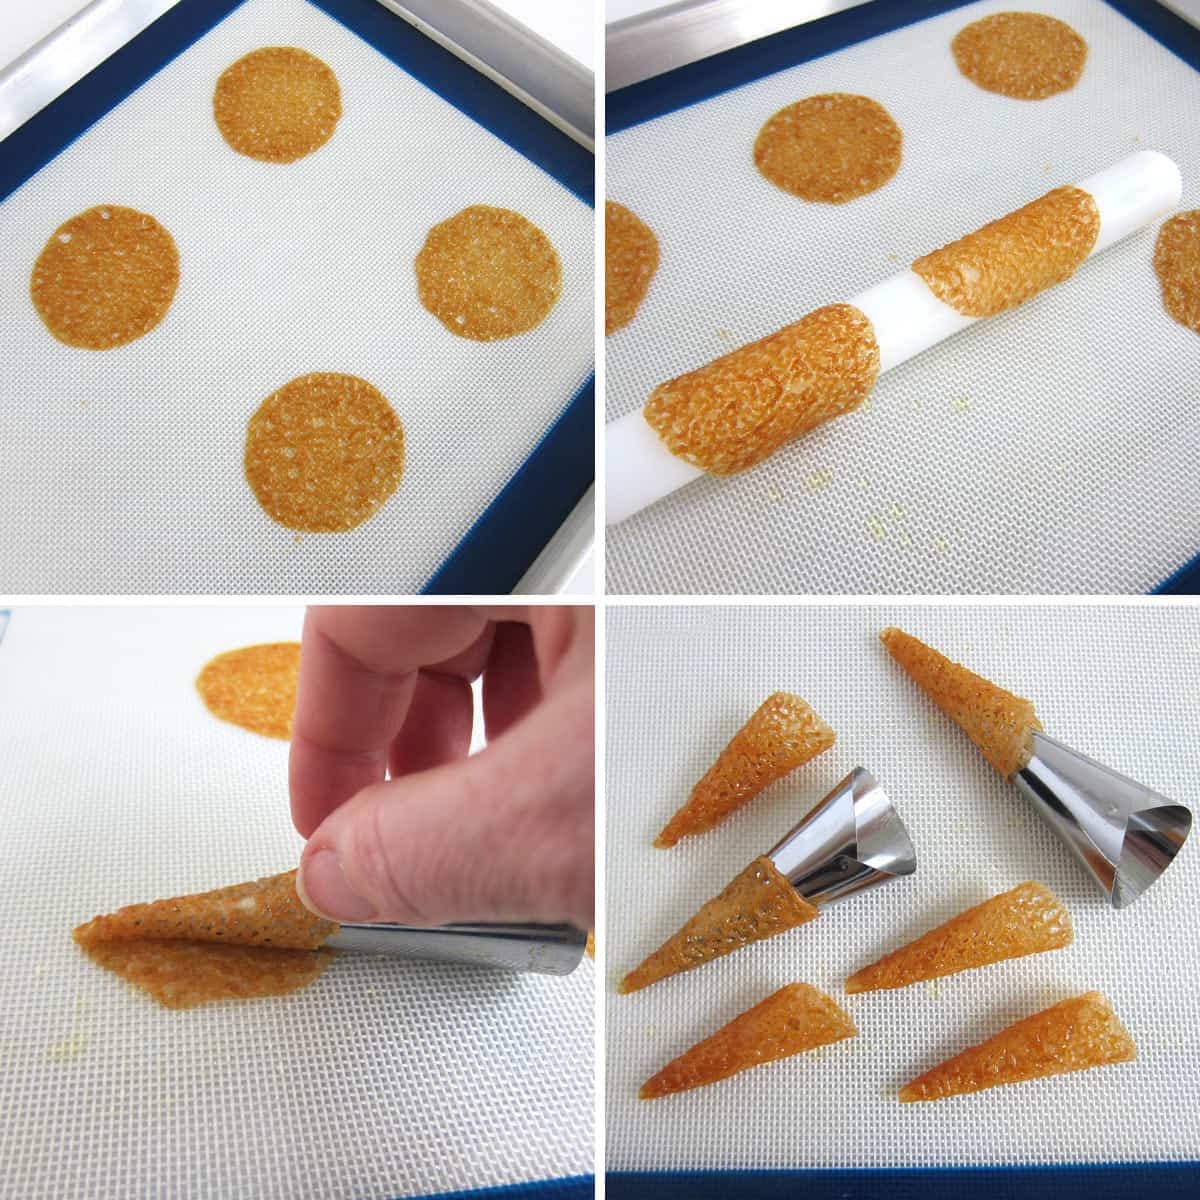 shaping thin orange tuile cookies around a metal cream horn form and around a rolling pin